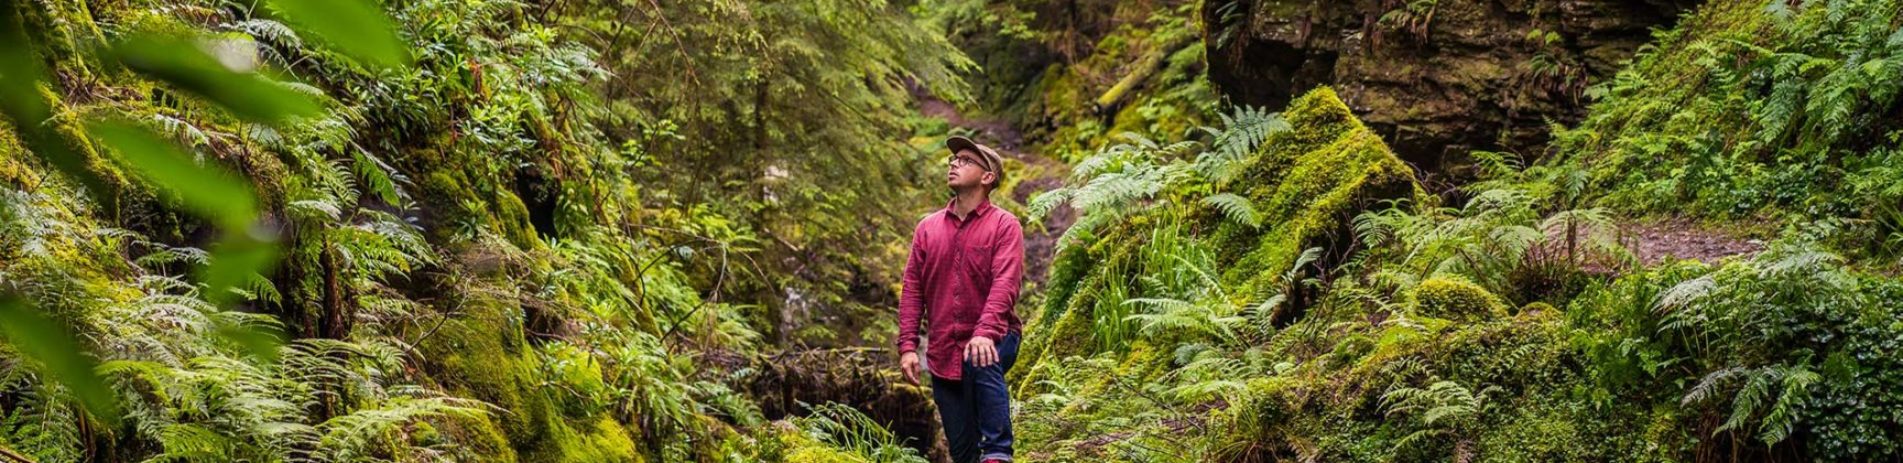 man-in-red-shirt-admiring-view-in-the-forest-surrounded-by-lush-green-ferns-moss-and-trees